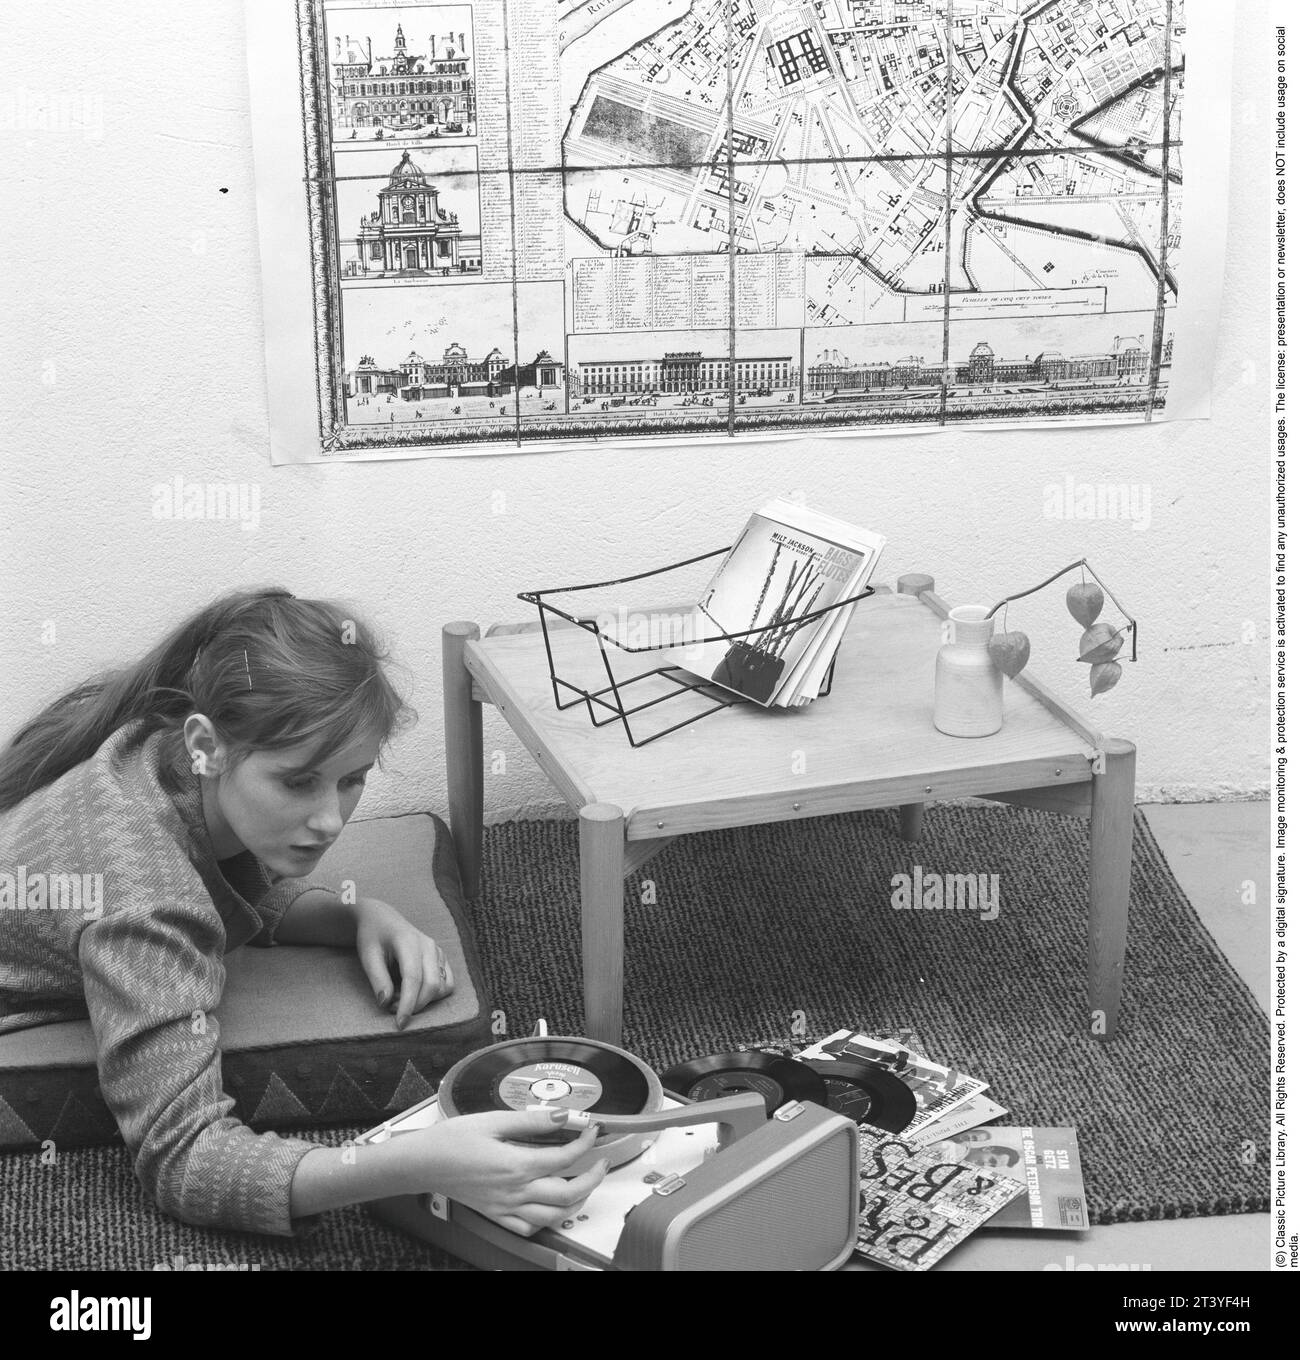 Woman at a gramophone in the 1950s. A typical 1950s teenage girl lying on the floor listening to music from a small gramophone. She is playing the type of records called singles. A record that typically contained a recording of fewer tracks than an LP record. This single record was played at the speed 45 rpm (revolutions per minute) and was 7 inches in diameter, 17,8 cm. The first single record was released 31 march 1949 by RCA Victor. Sweden 1959. Ref SSMSAX000521L Stock Photo